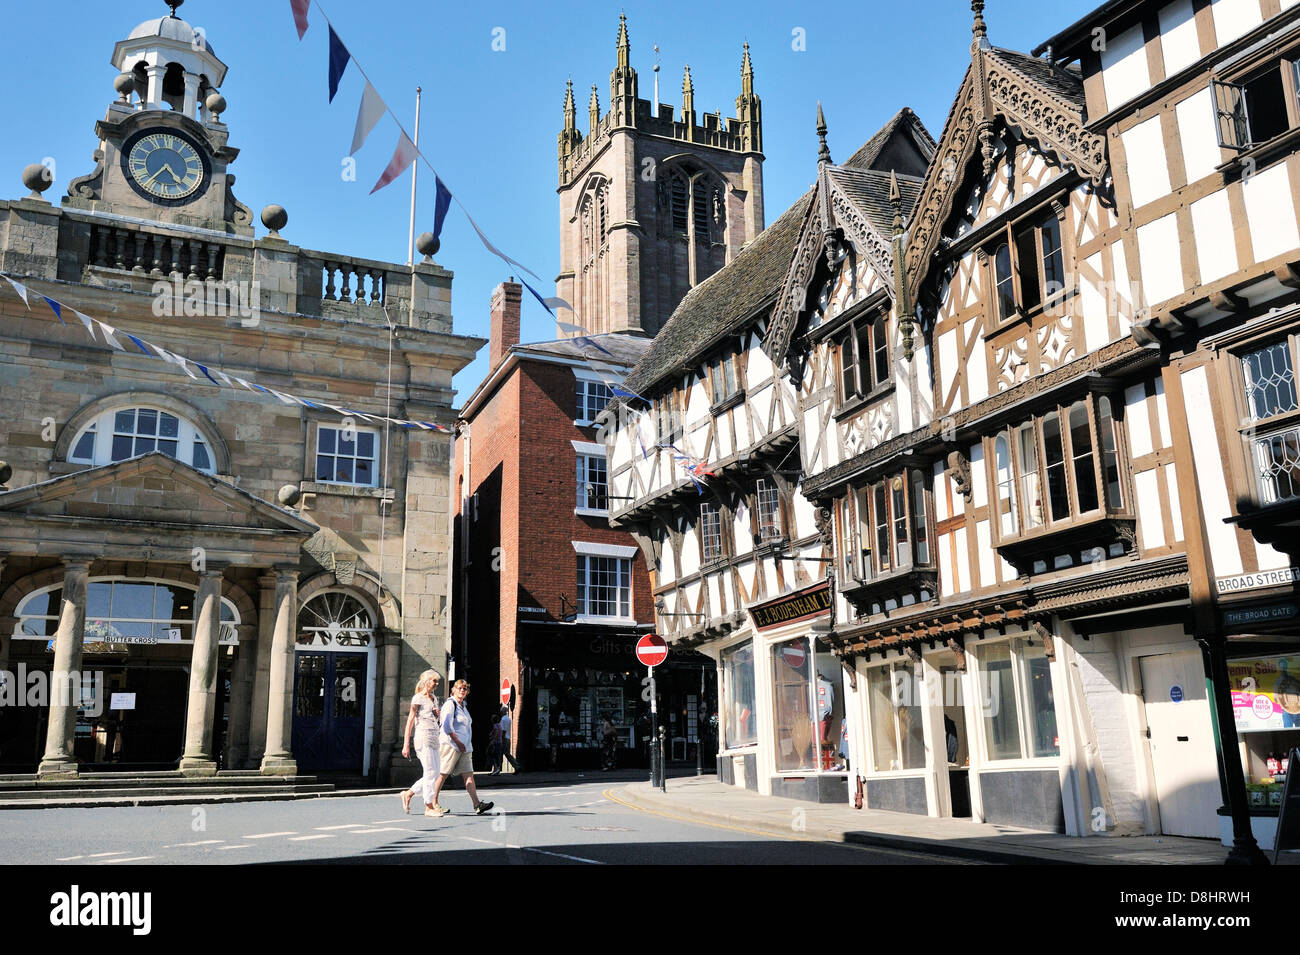 Medieval town of Ludlow, Shropshire, England. King, High and Broad streets meet at the Butter Cross beside St. Laurence Church Stock Photo